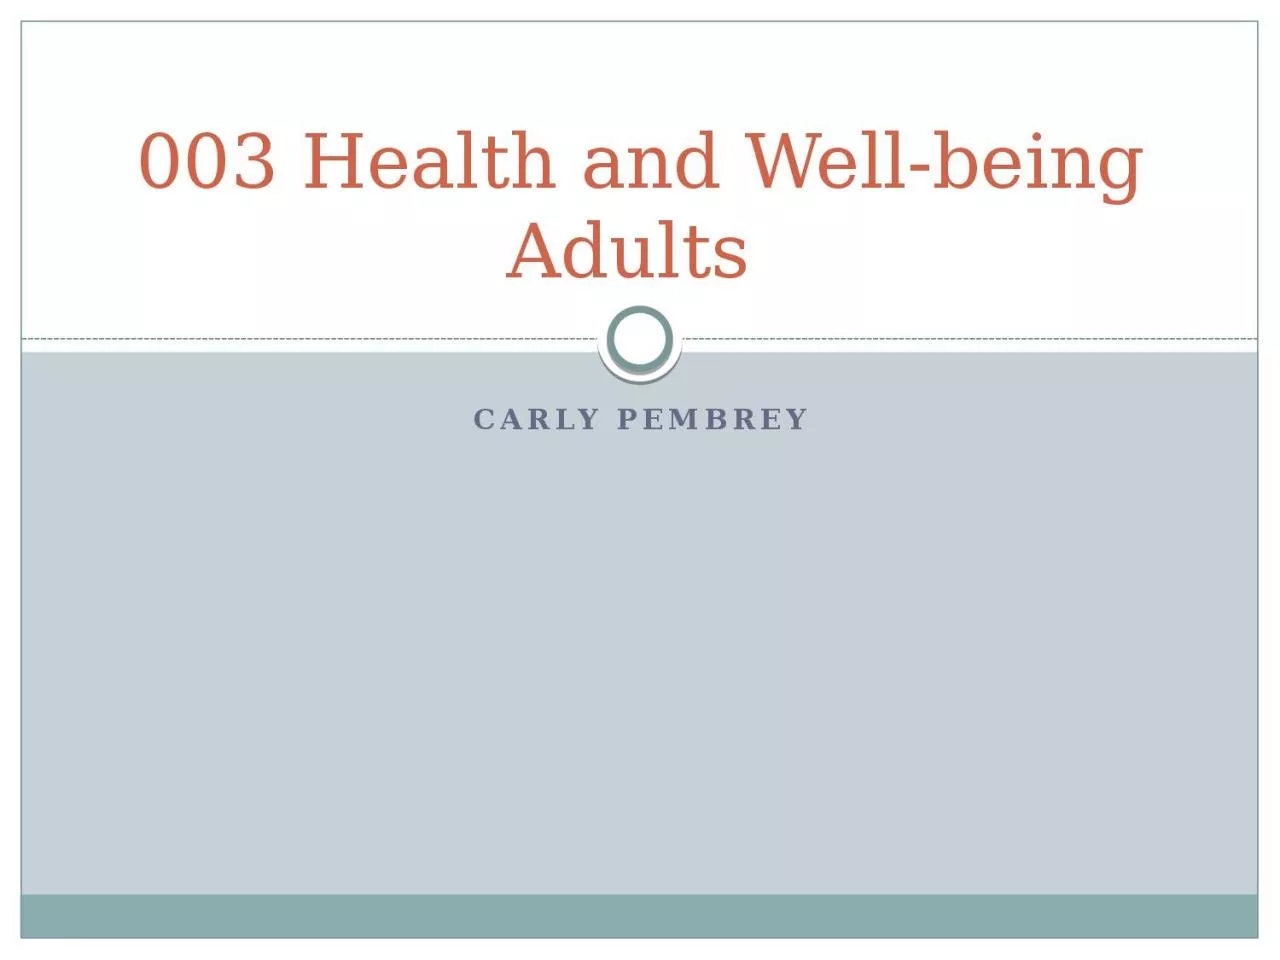 Carly  Pembrey 003 Health and Well-being Adults